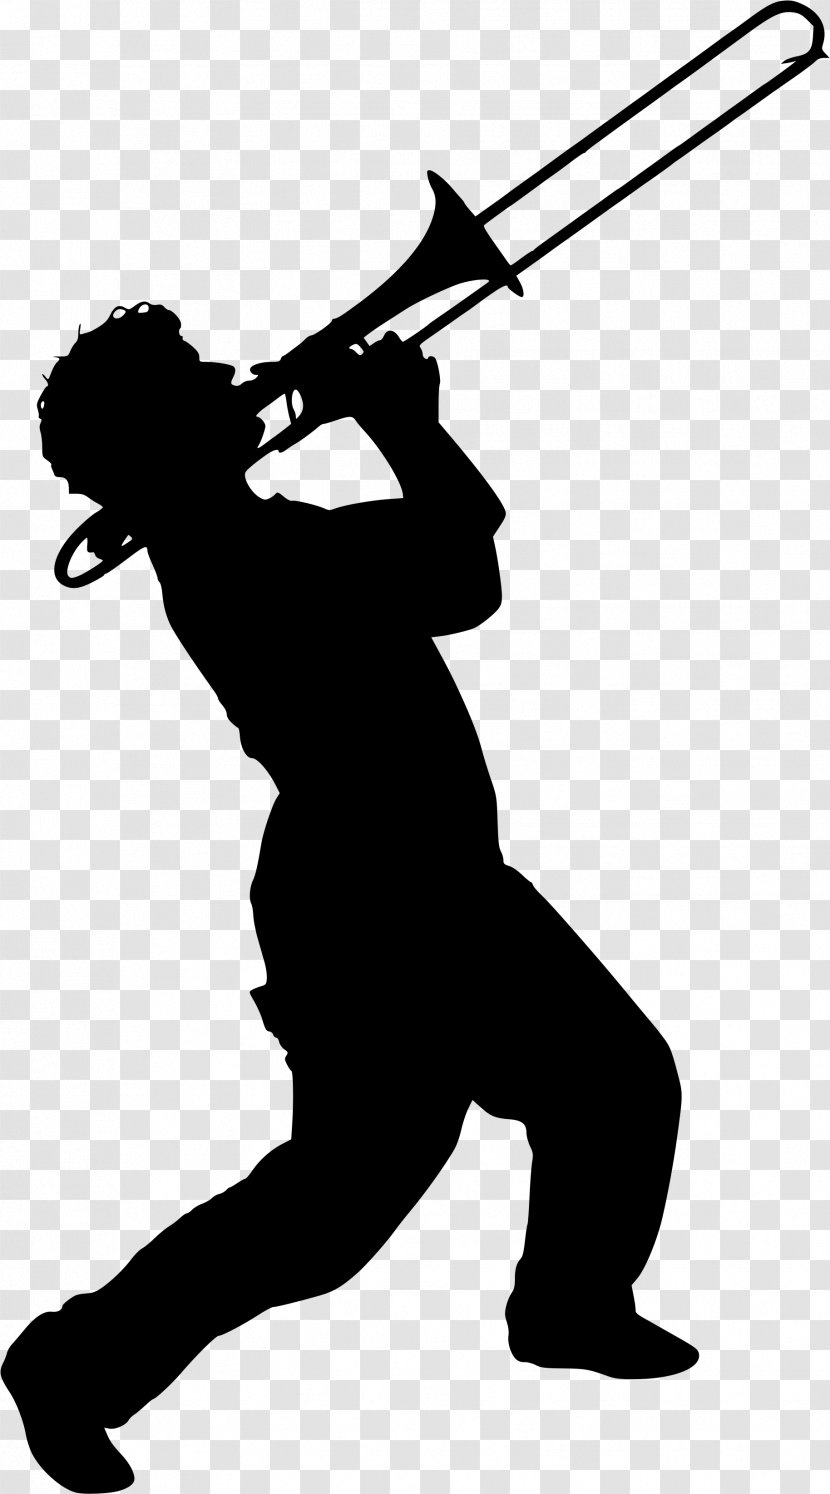 Trumpeter Silhouette Trumpet Solid Swing+hit Trombone - Swinghit Transparent PNG